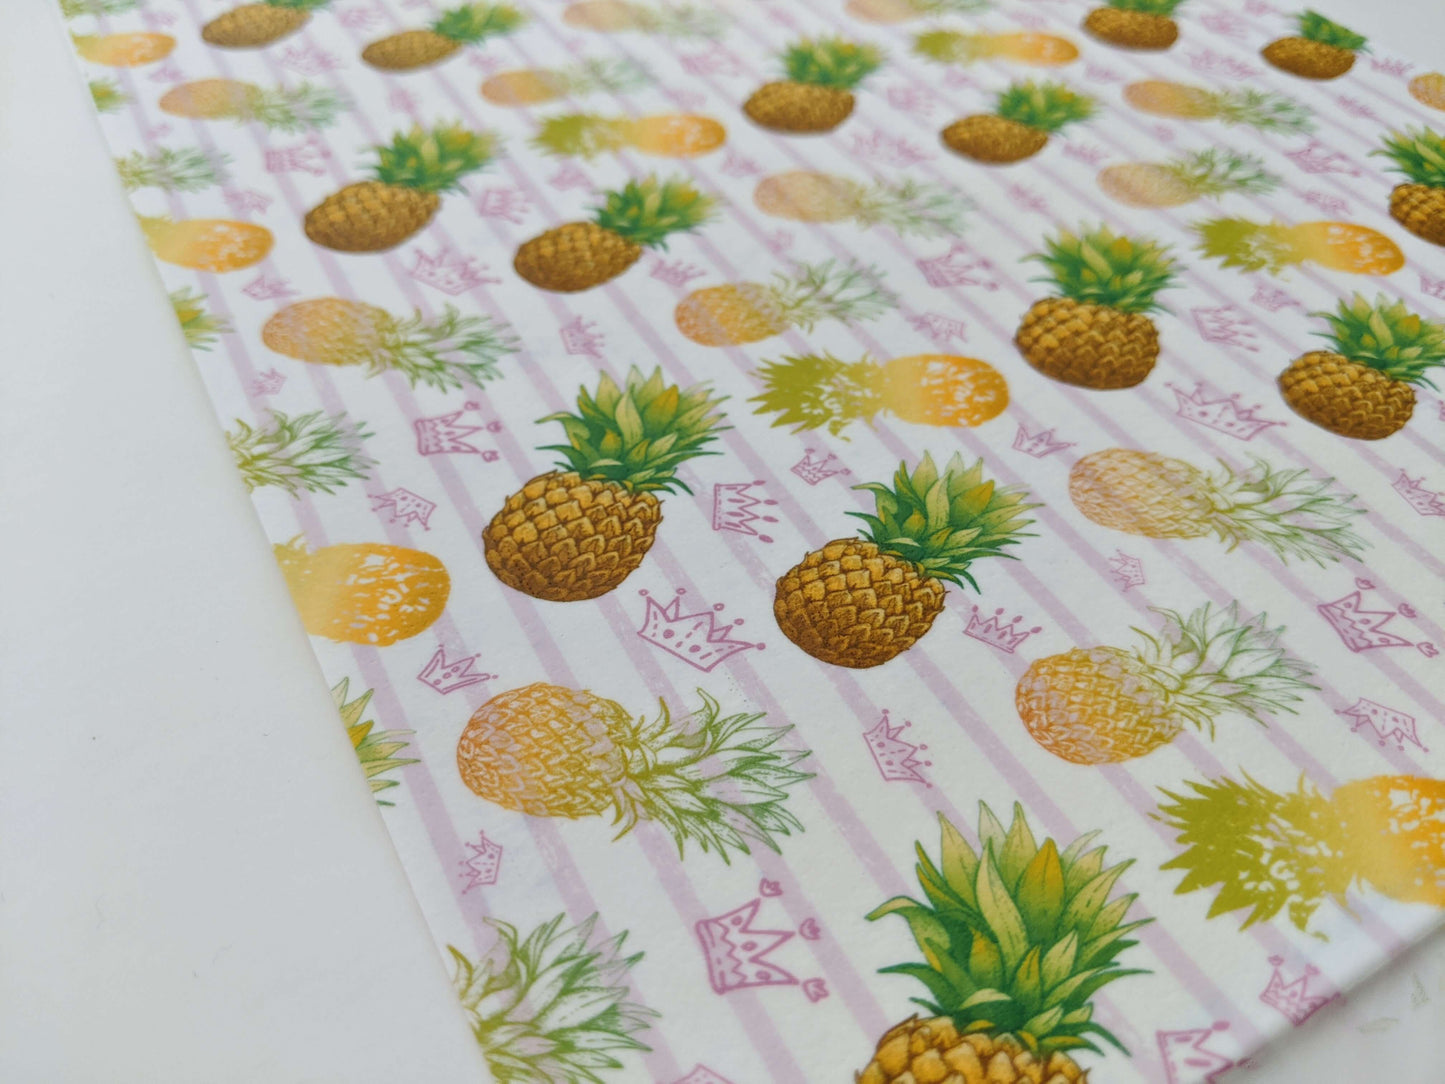 Pineapple Watercolor Pattern - Icing - ISA048.